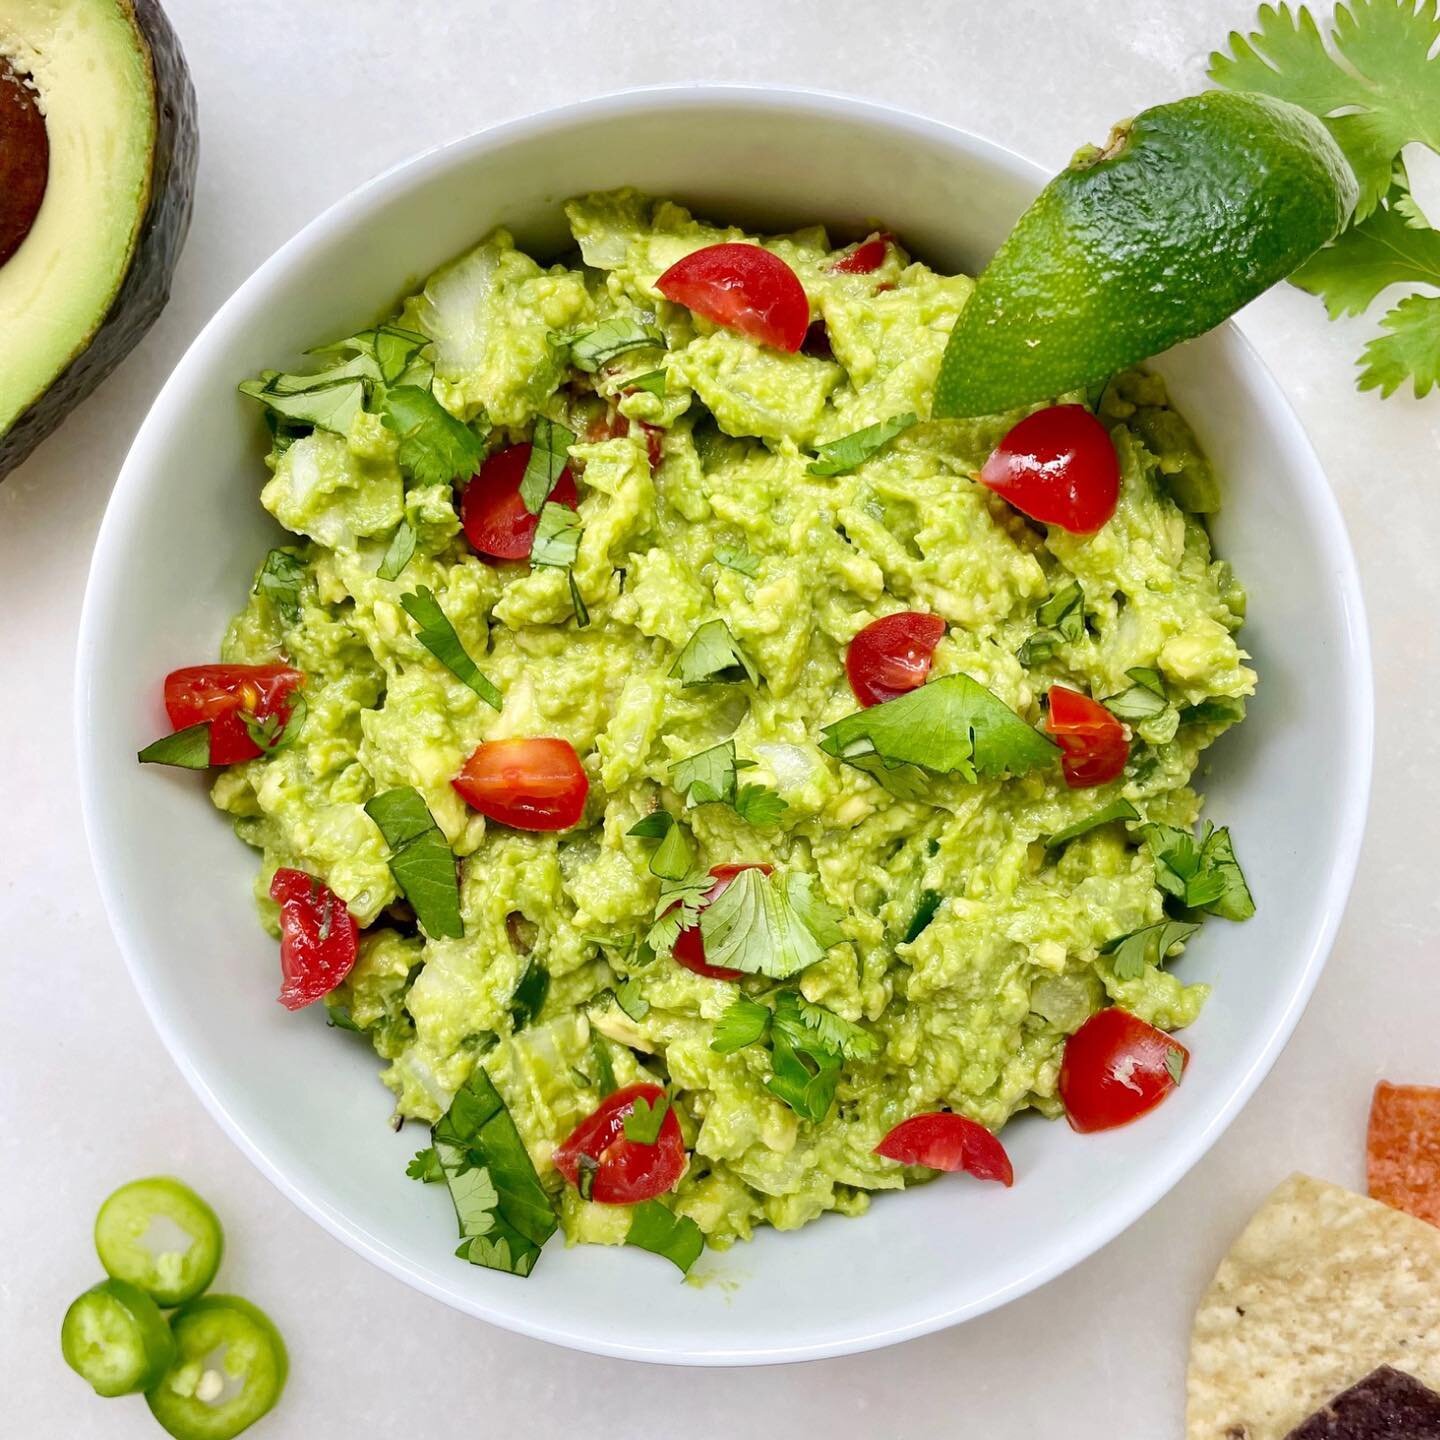 Diving into Memorial Day weekend and this 7 ingredient guacamole 🥑✨🎉
.
This is my favorite guacamole recipe that&rsquo;s SO quick + easy to make using fresh ingredients! It's perfect for a snack or app for memorial day weekend and those upcoming su